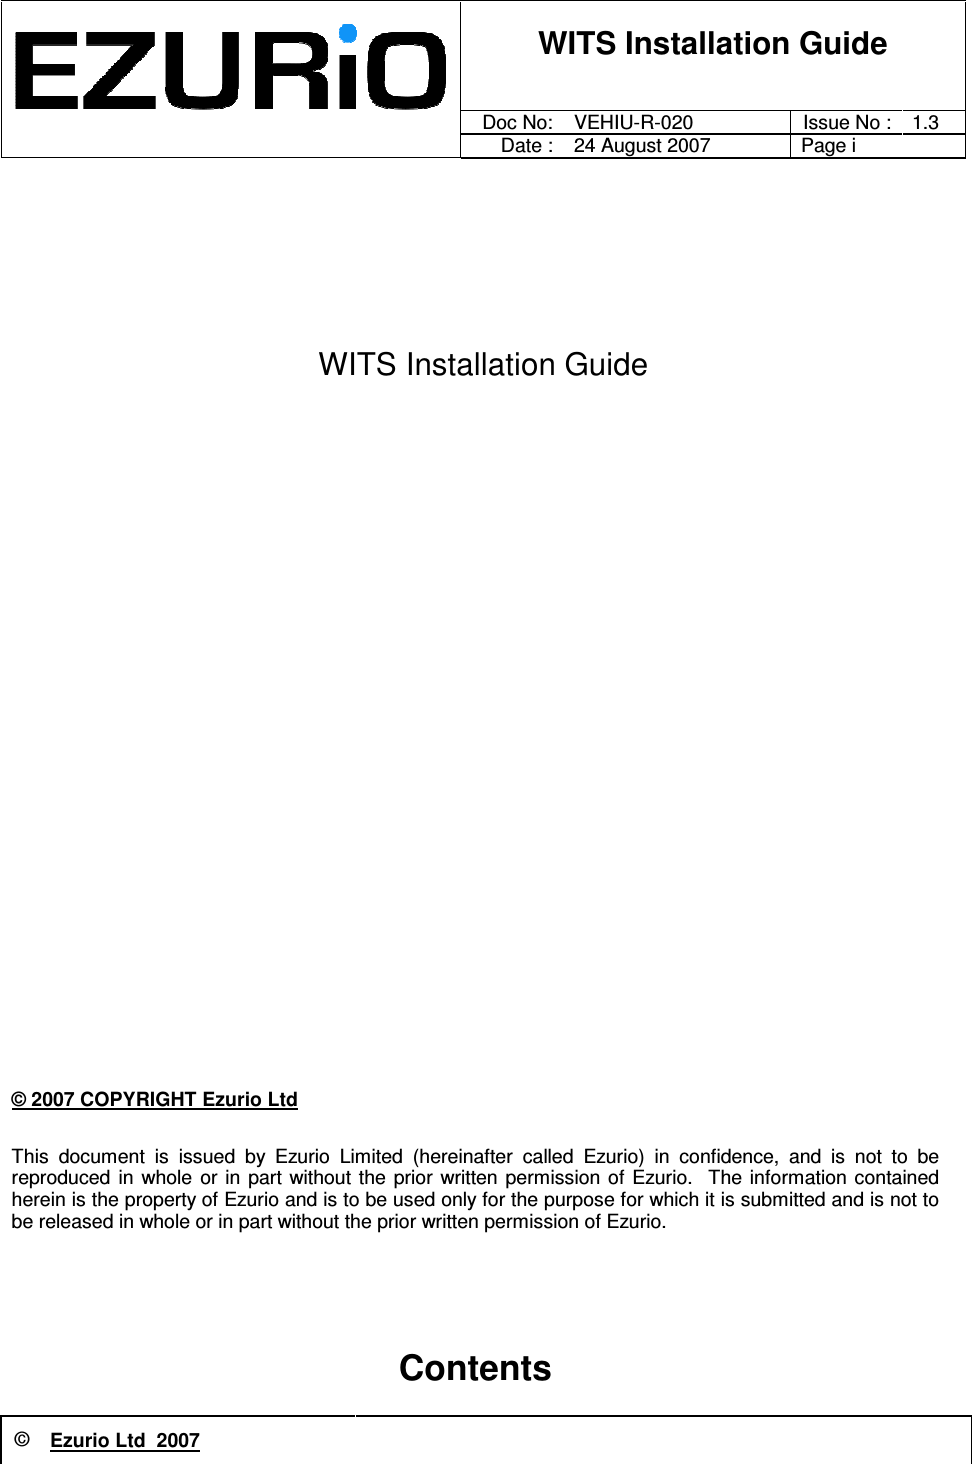  © Ezurio Ltd  2007          WITS Installation Guide      Doc No:  VEHIU-R-020 Issue No : 1.3     Date : 24 August 2007  Page i   WITS Installation Guide                               © 2007 COPYRIGHT Ezurio Ltd This  document  is  issued  by  Ezurio  Limited  (hereinafter  called  Ezurio)  in  confidence,  and  is  not  to  be reproduced  in  whole  or in  part without the  prior written permission of  Ezurio.   The  information  contained herein is the property of Ezurio and is to be used only for the purpose for which it is submitted and is not to be released in whole or in part without the prior written permission of Ezurio.    Contents  